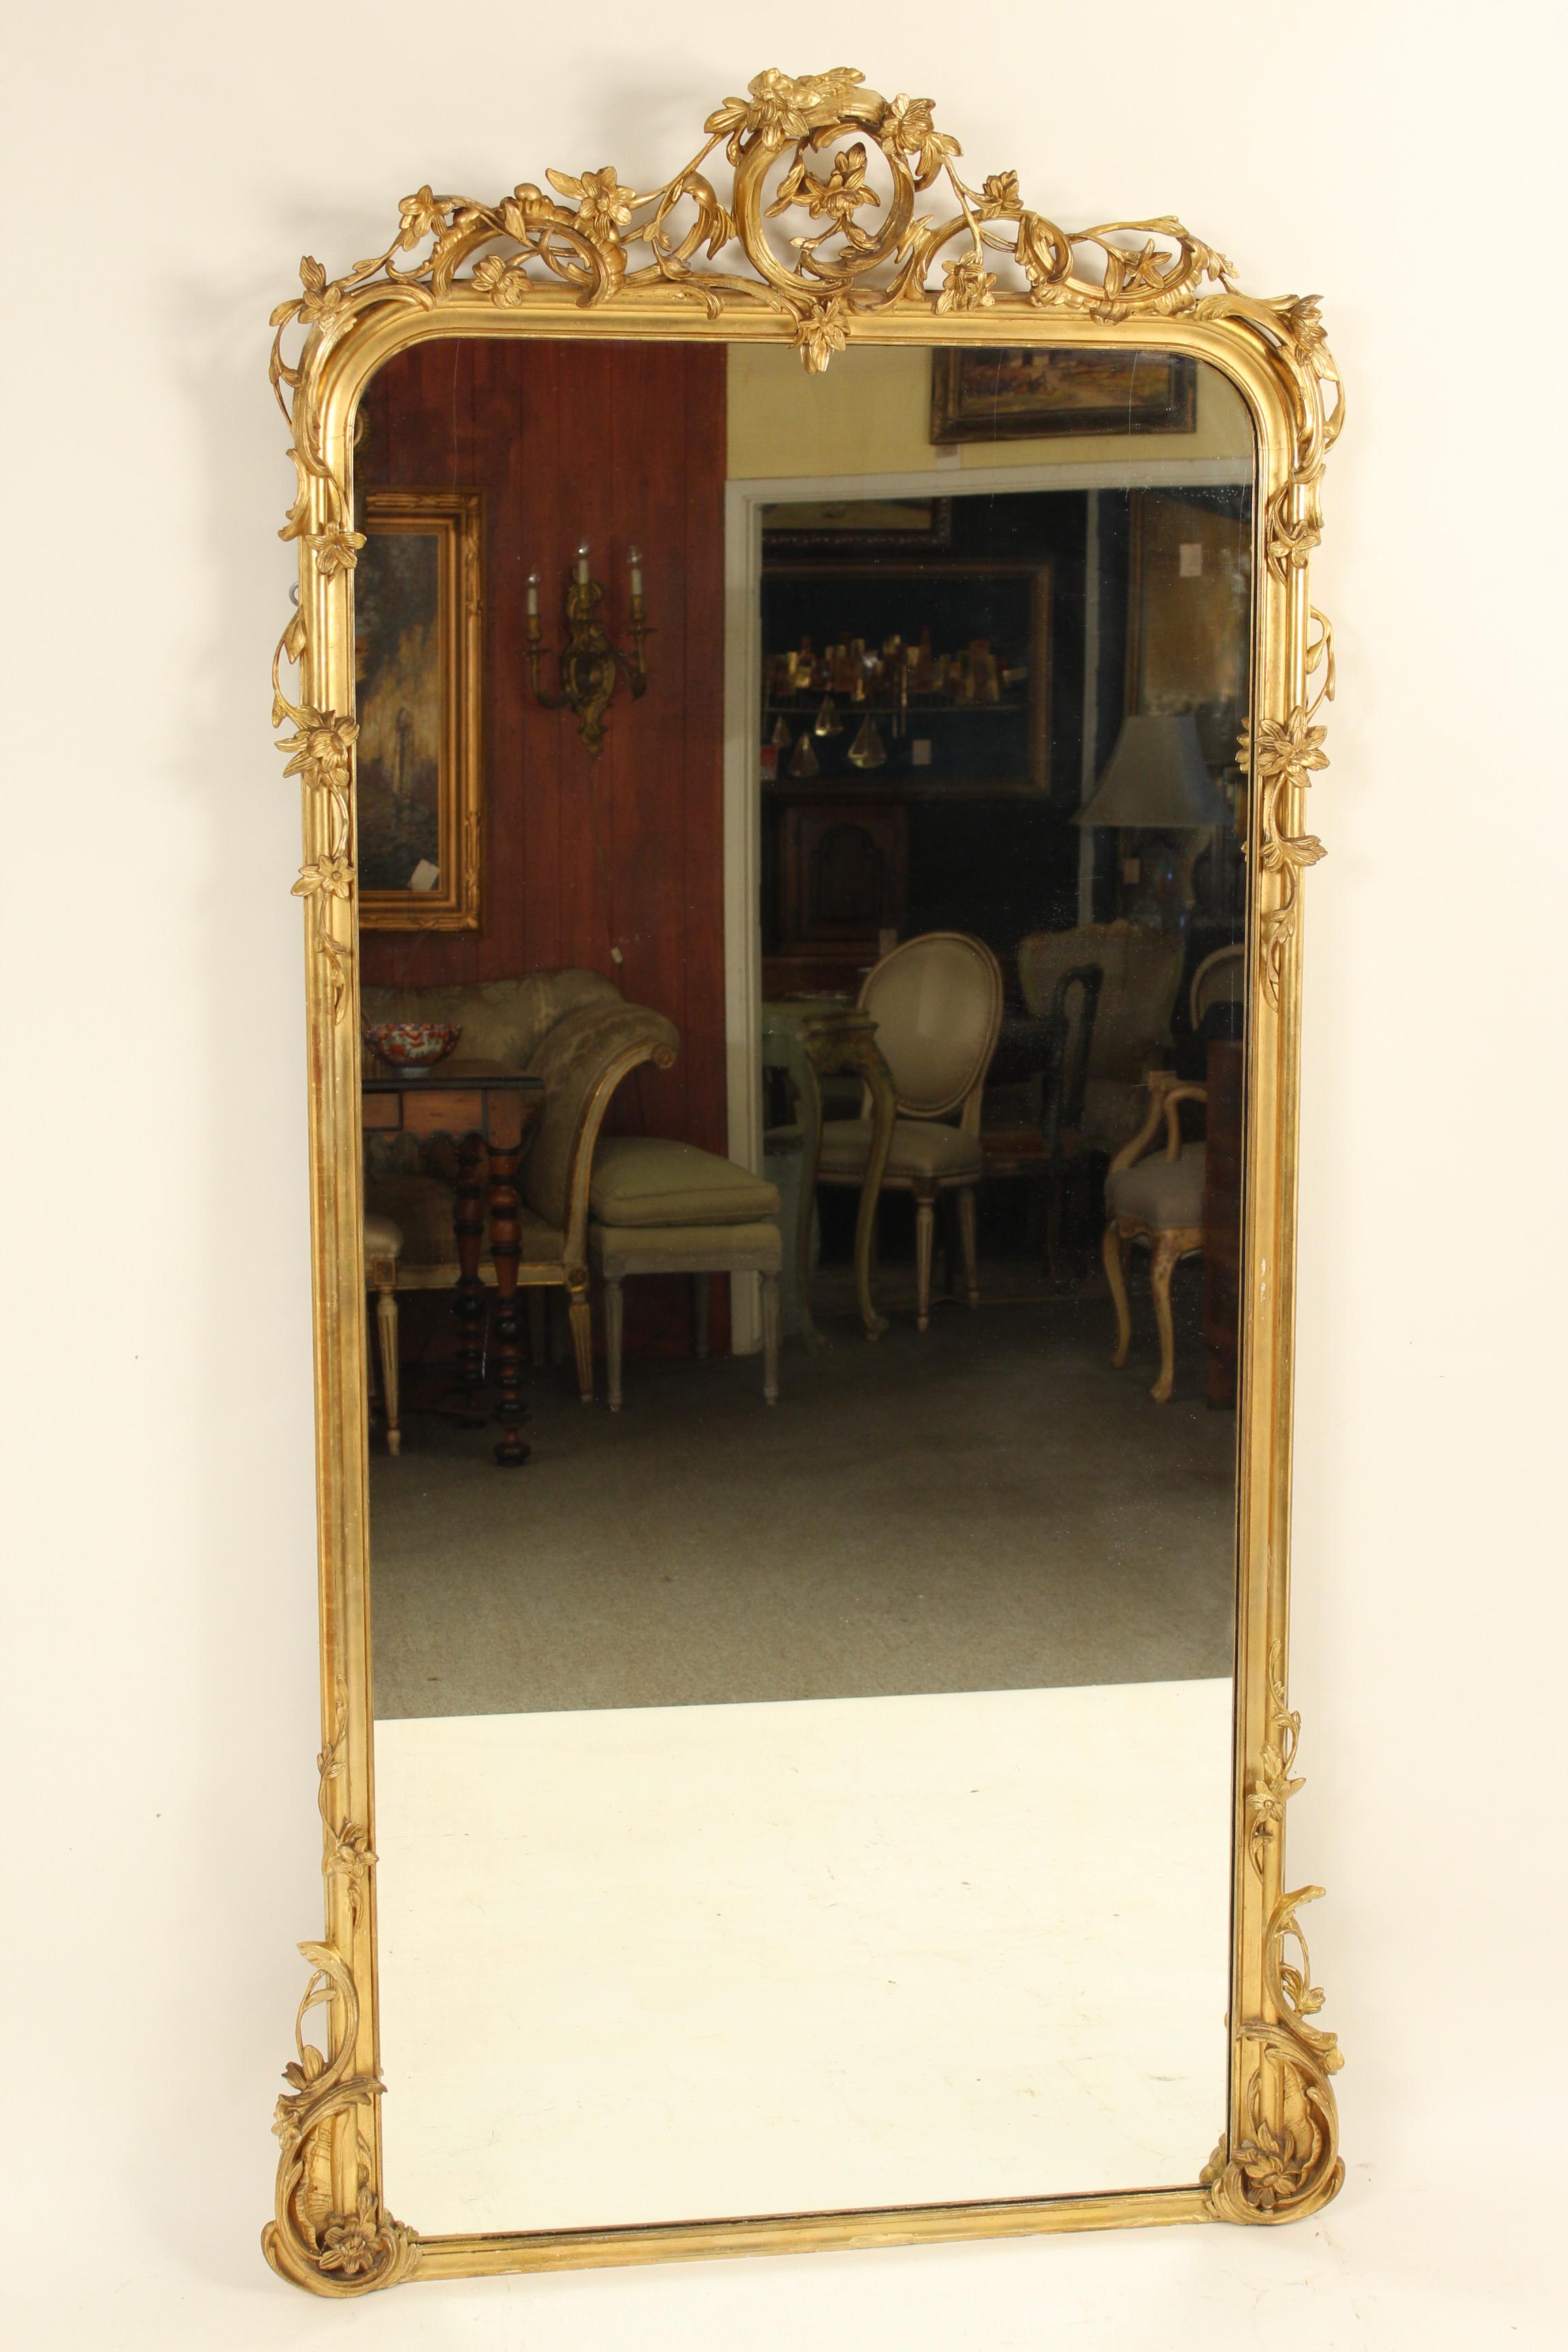 Antique Louis XV style giltwood and composition mirror with floral and c scroll designs, 19th century. This mirror has old gold leaf with some paint touch up. This mirror is very heavy and will require and professional to hang it.